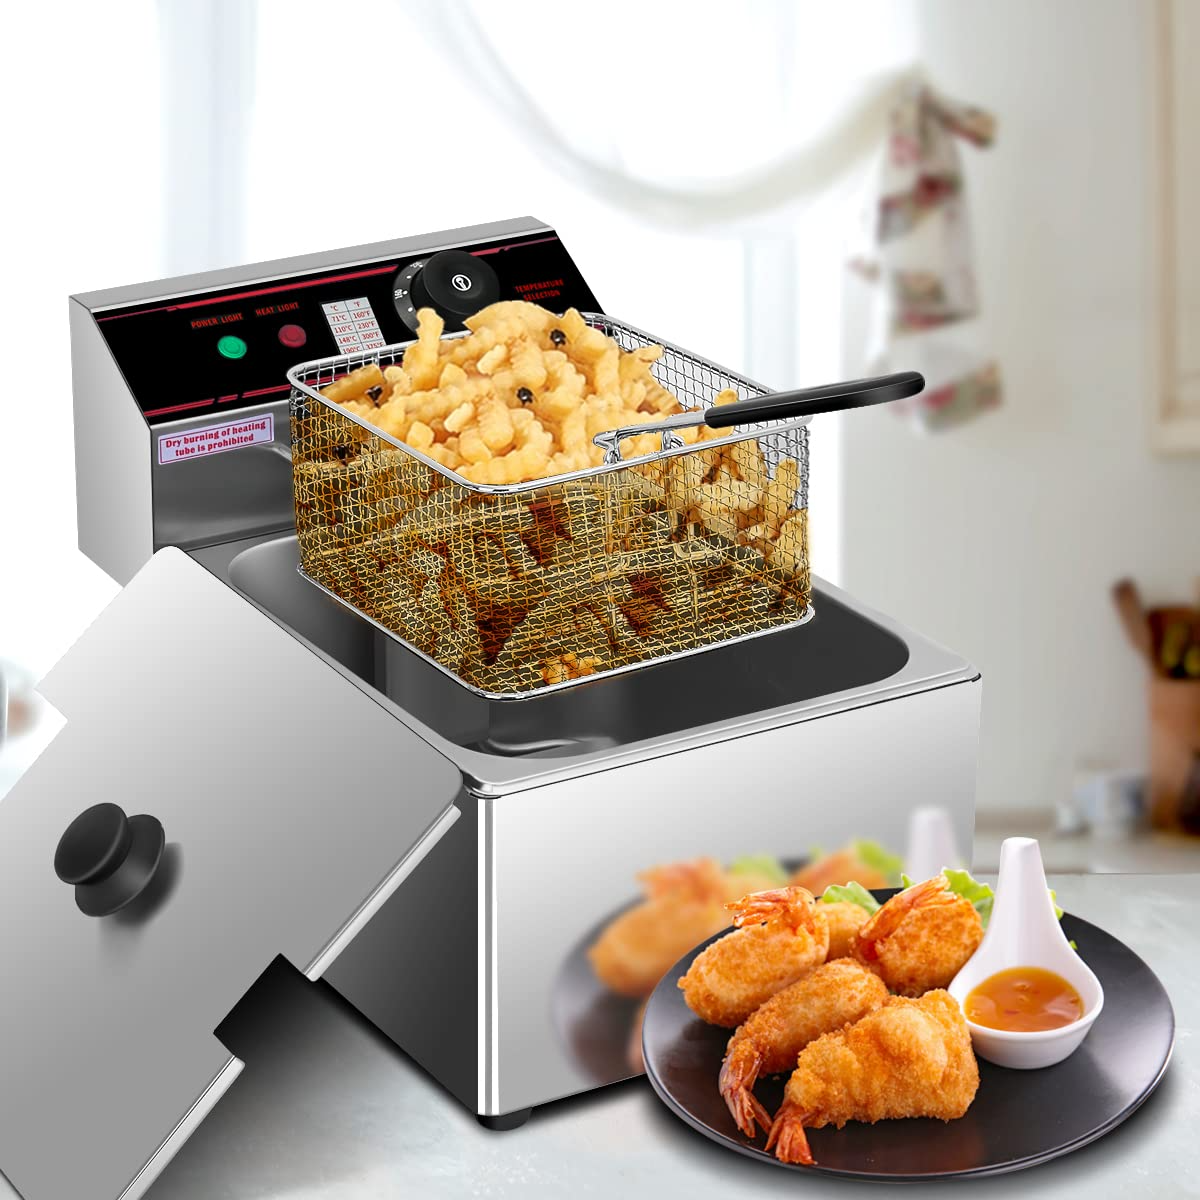 Giantex 1700W Commercial Deep Fryer, 6.4QT Stainless Steel Electric Deep Fryer with Removable Basket